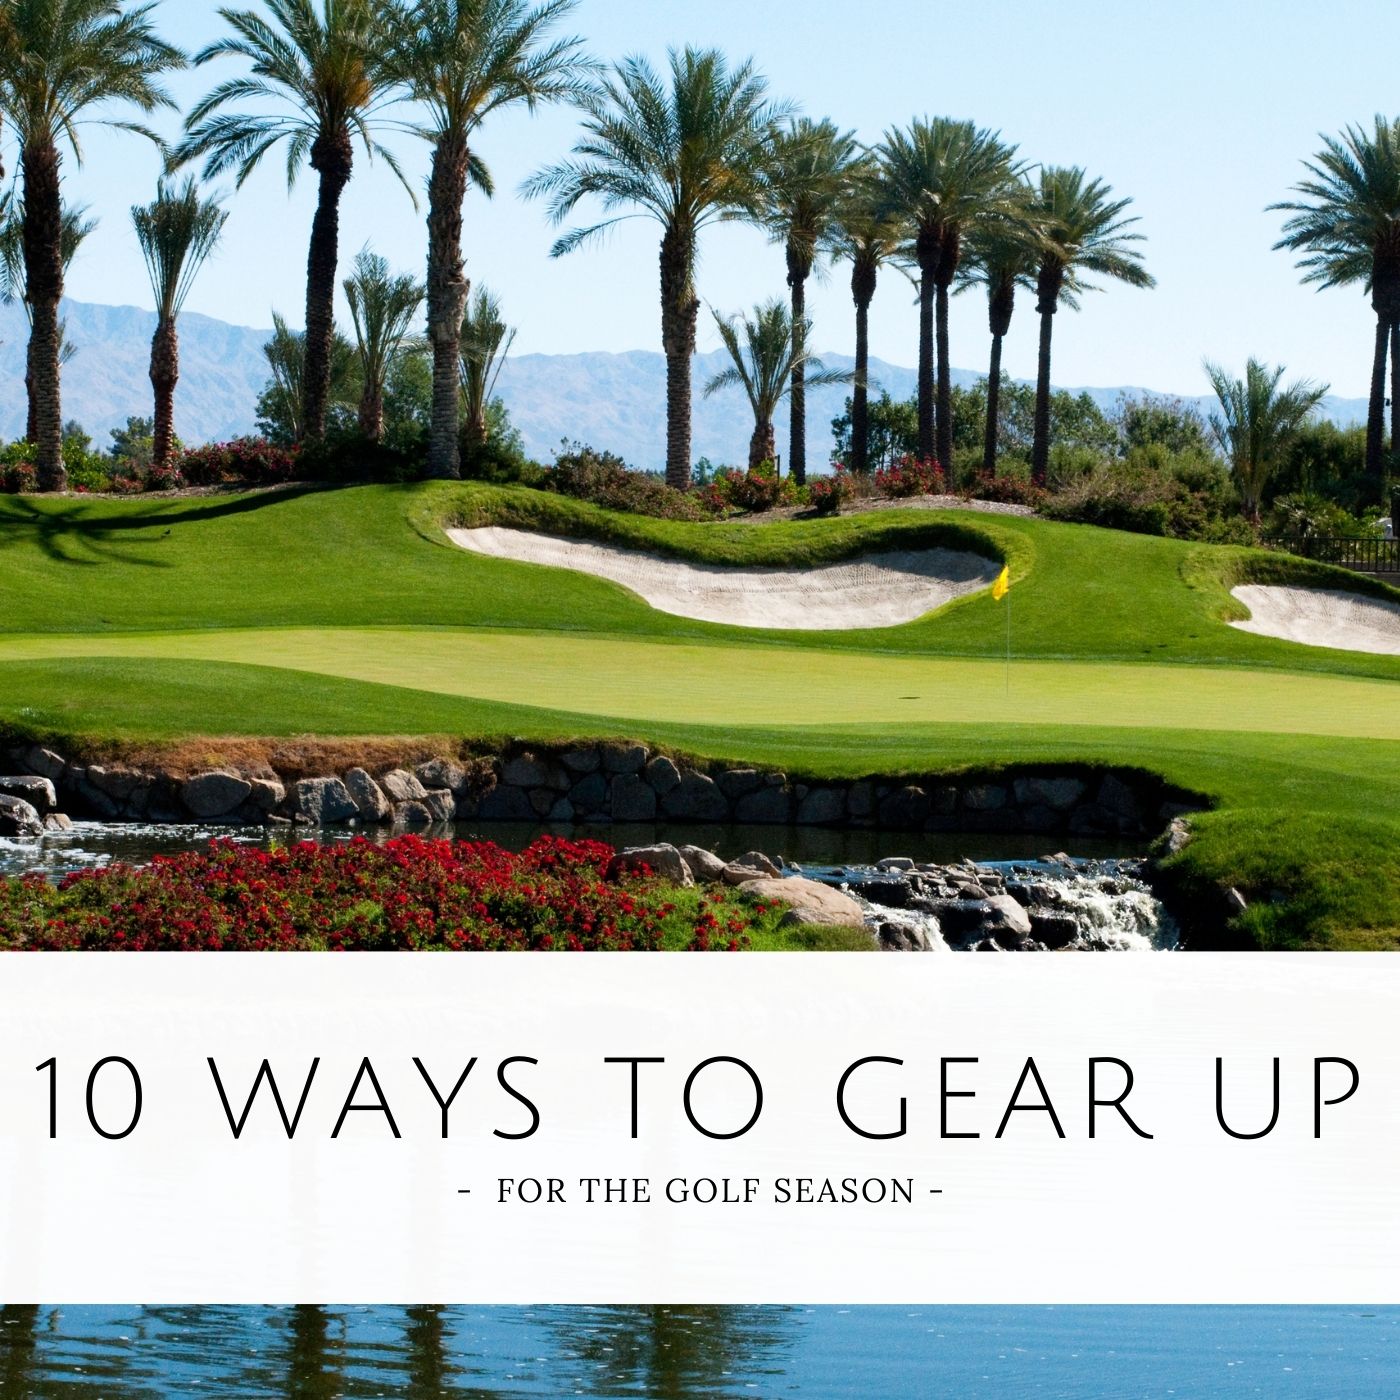 10 WAYS TO GEAR UP FOR THE GOLF SEASON